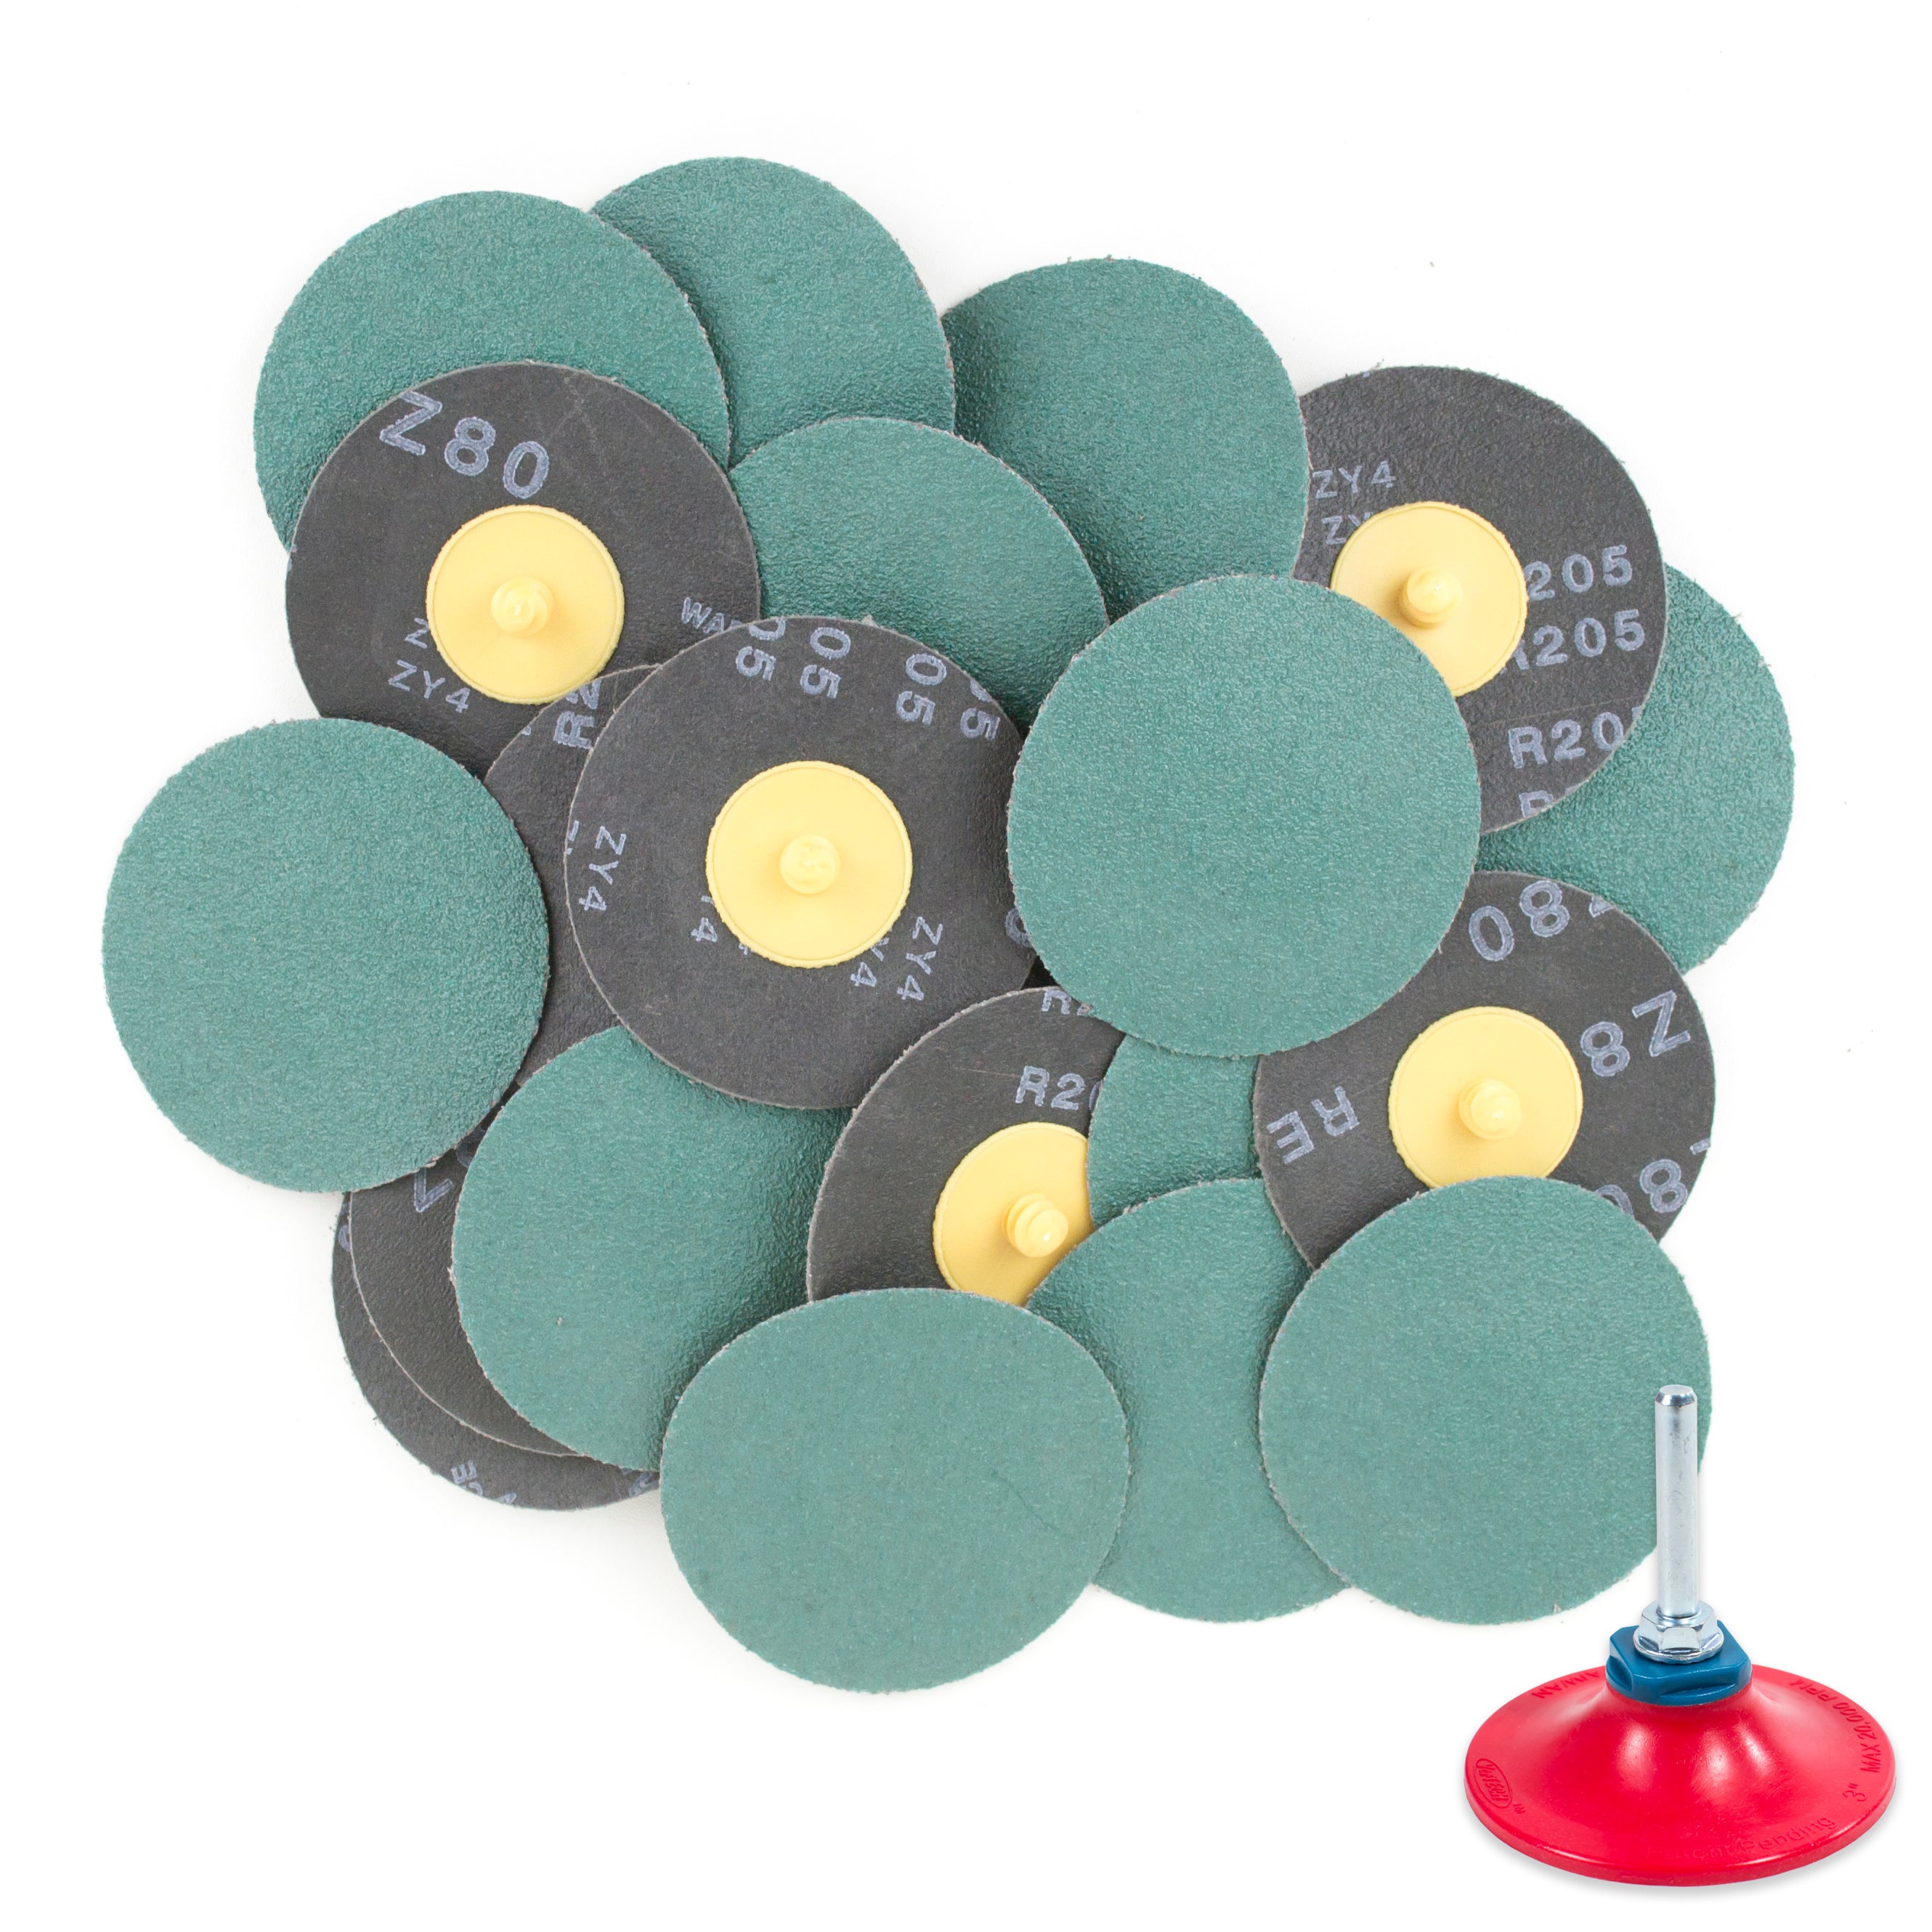 3 inch 80 Grit Zirconia “Roloc” Roll-On Type Abrasive Sanding Discs (25 pcs) with Holder